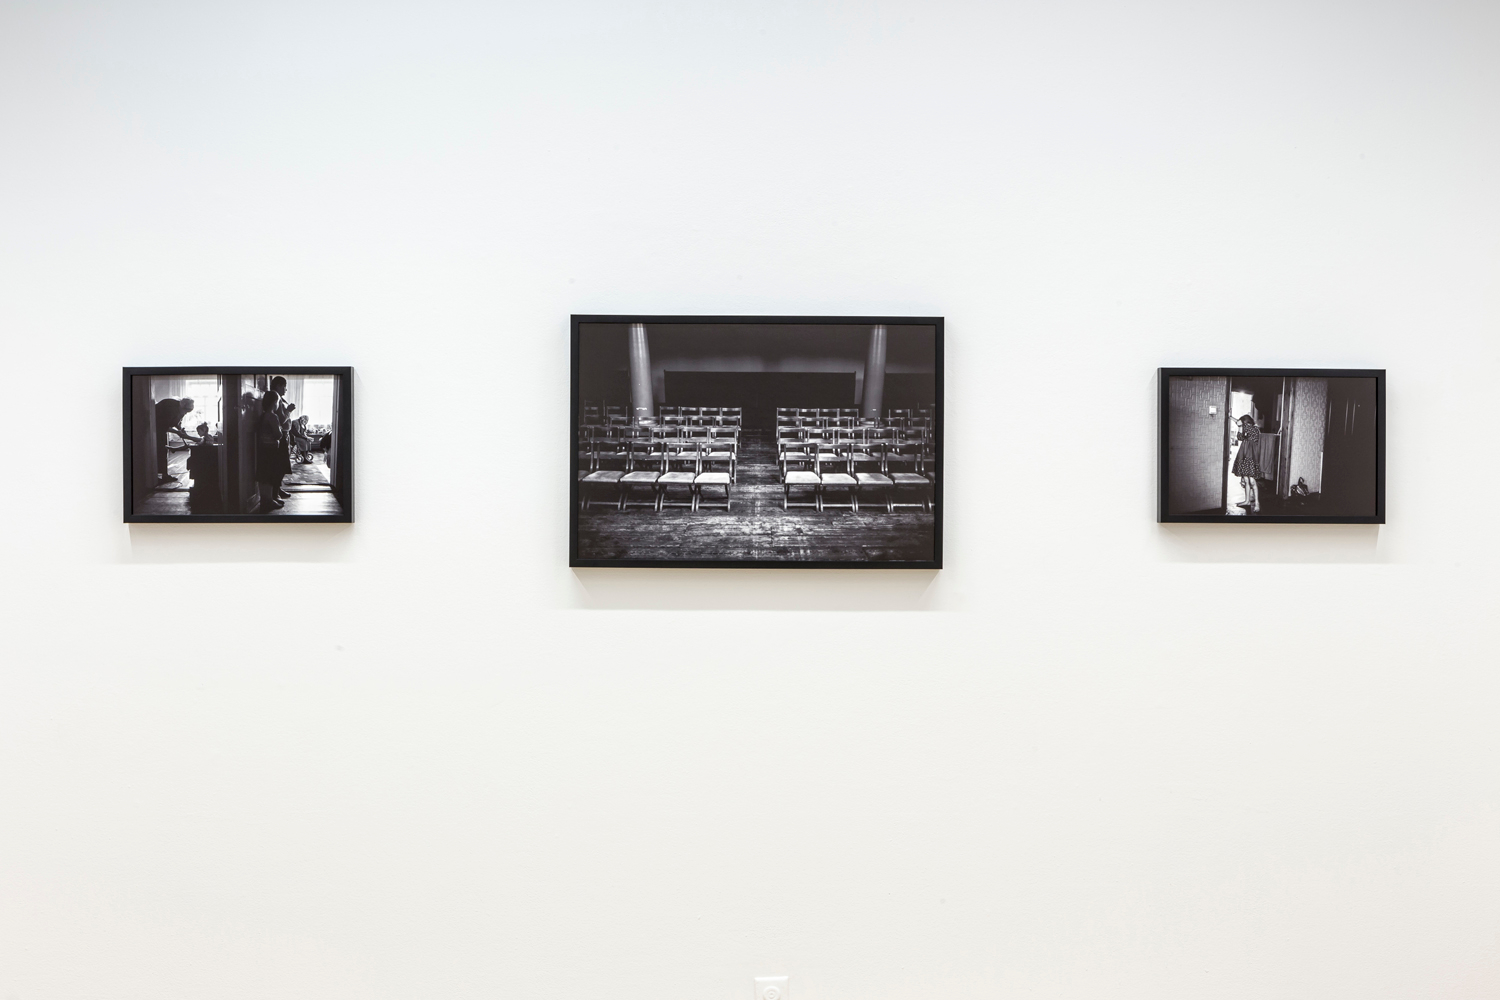     Installation view of Ian Willms, The Road to Nowhere, Photo: Toni Hafkenscheid

